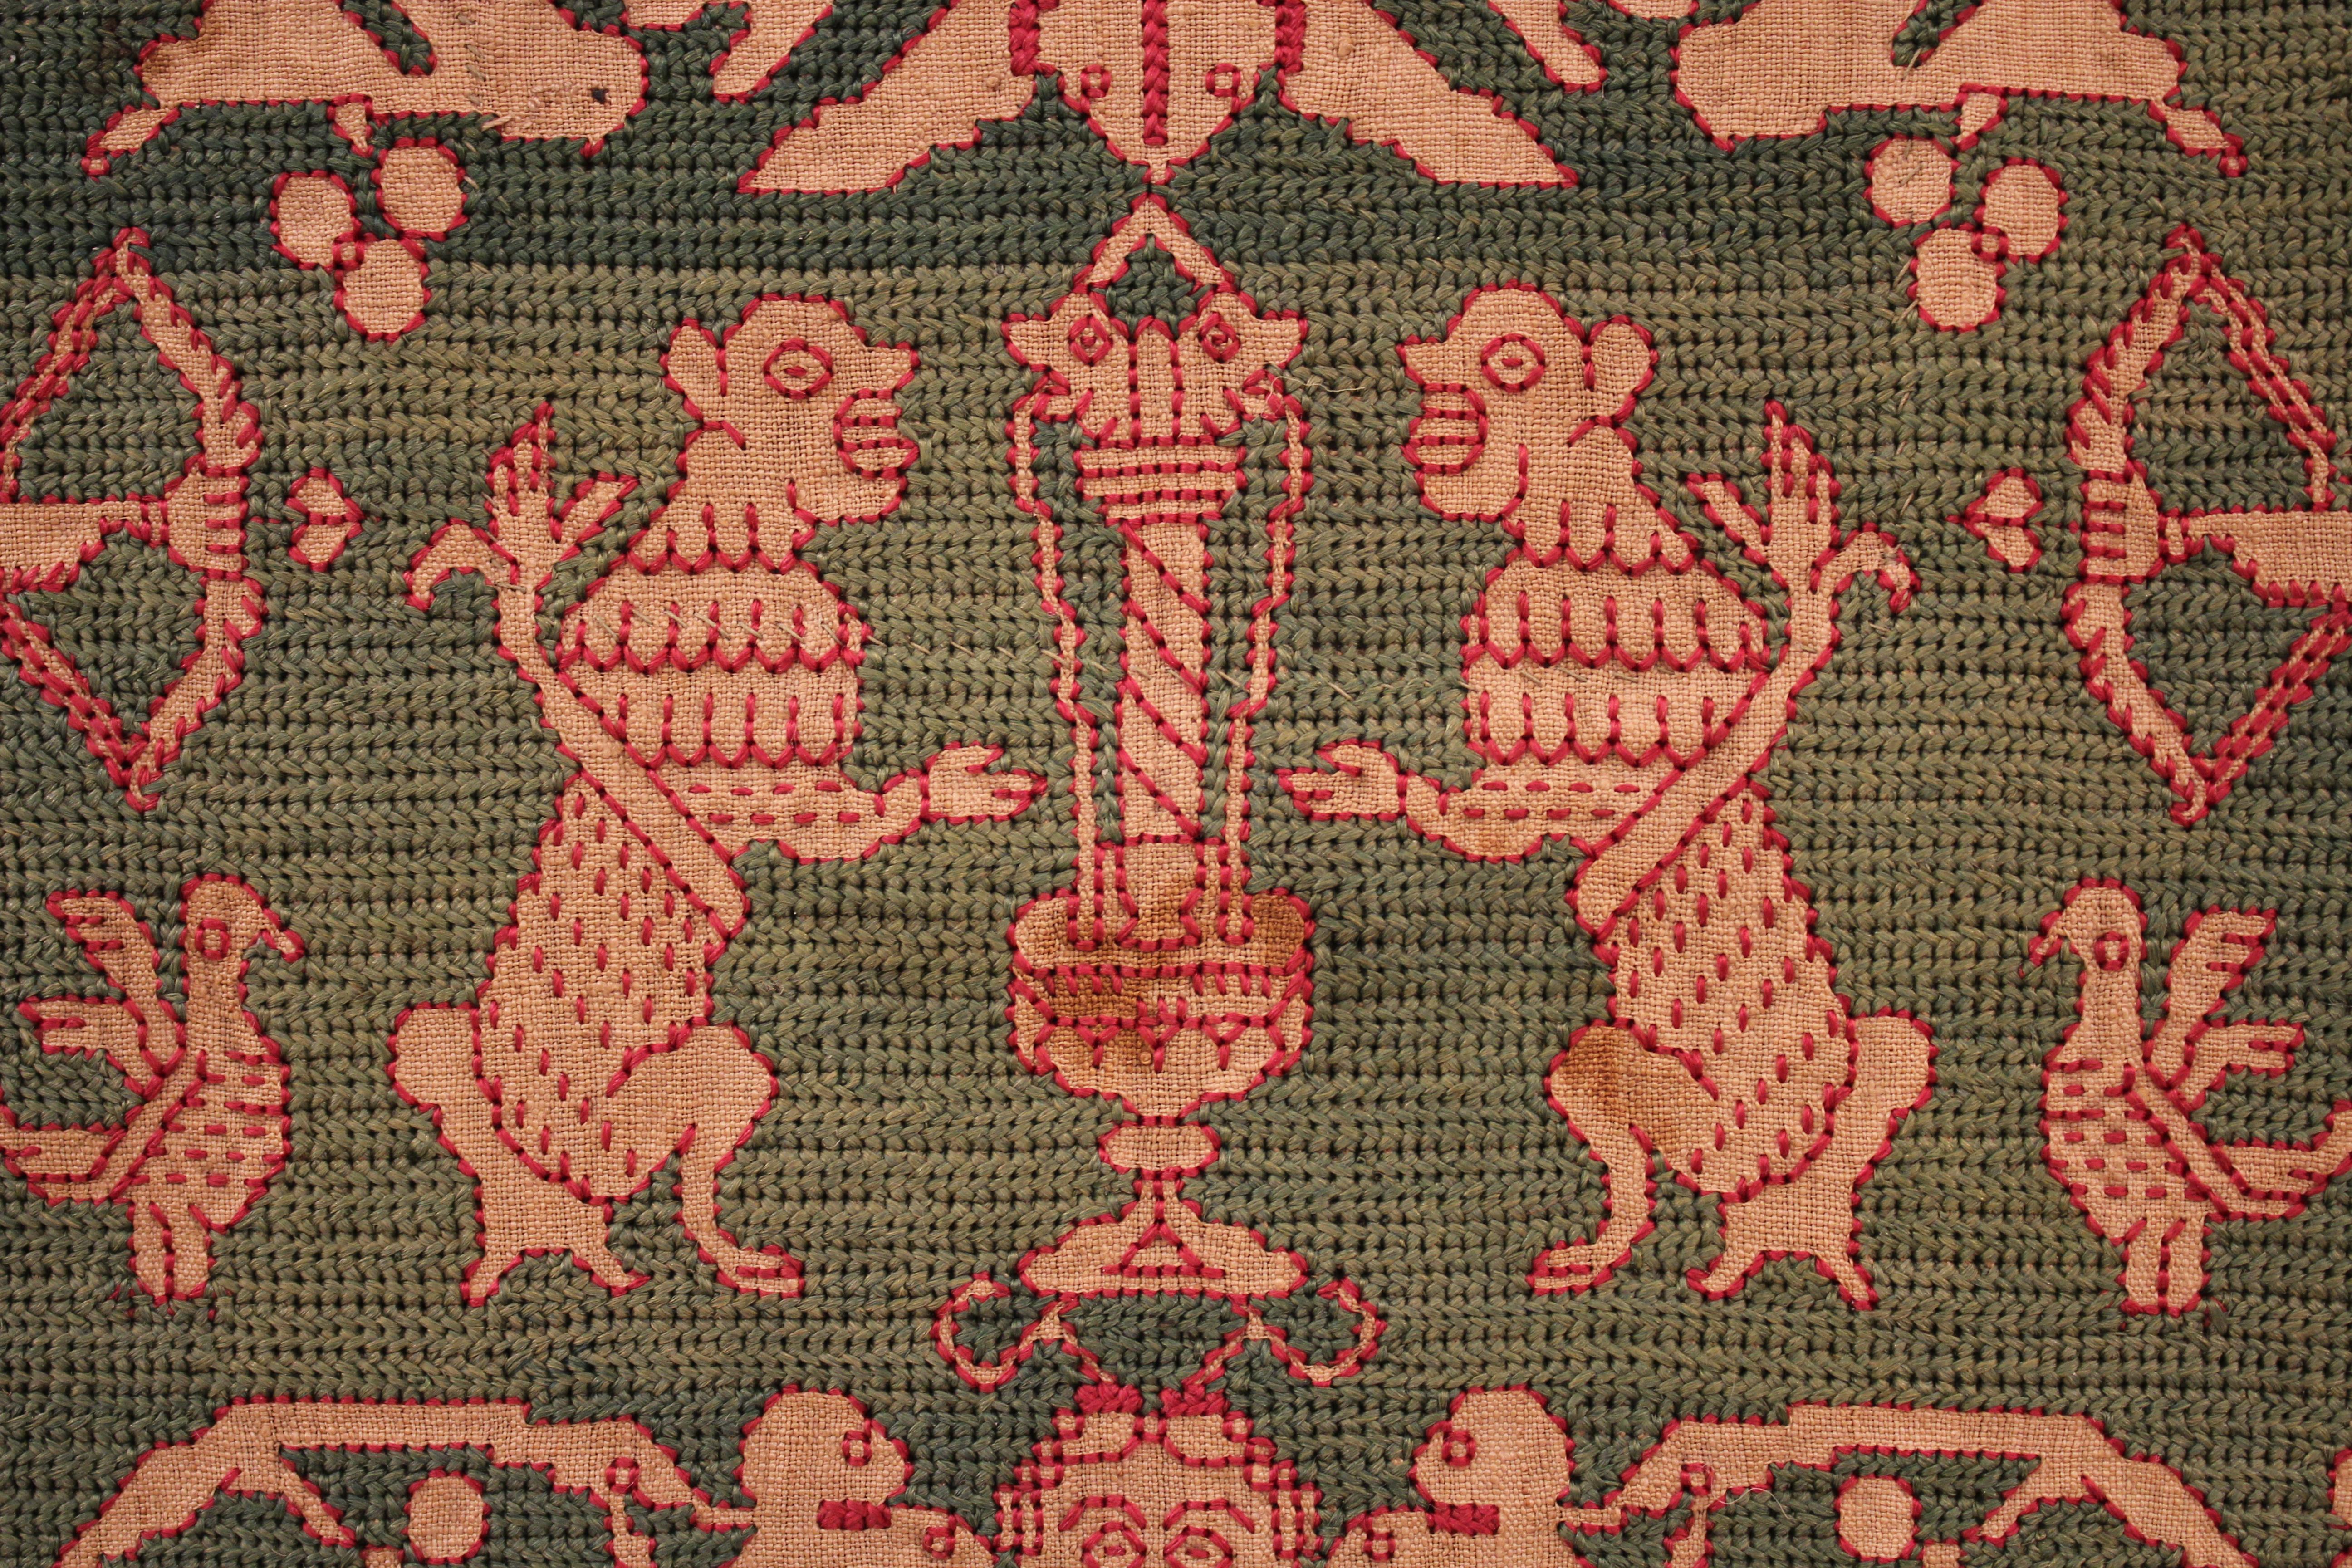 A very rare, early Italian embroidery from Sicily very finely worked in emerald green silk on a gauze or linen background. It depicts a flamboyant pattern of grotesques alternated to angels flanking a pair of fantastic animals. The two-headed eagle